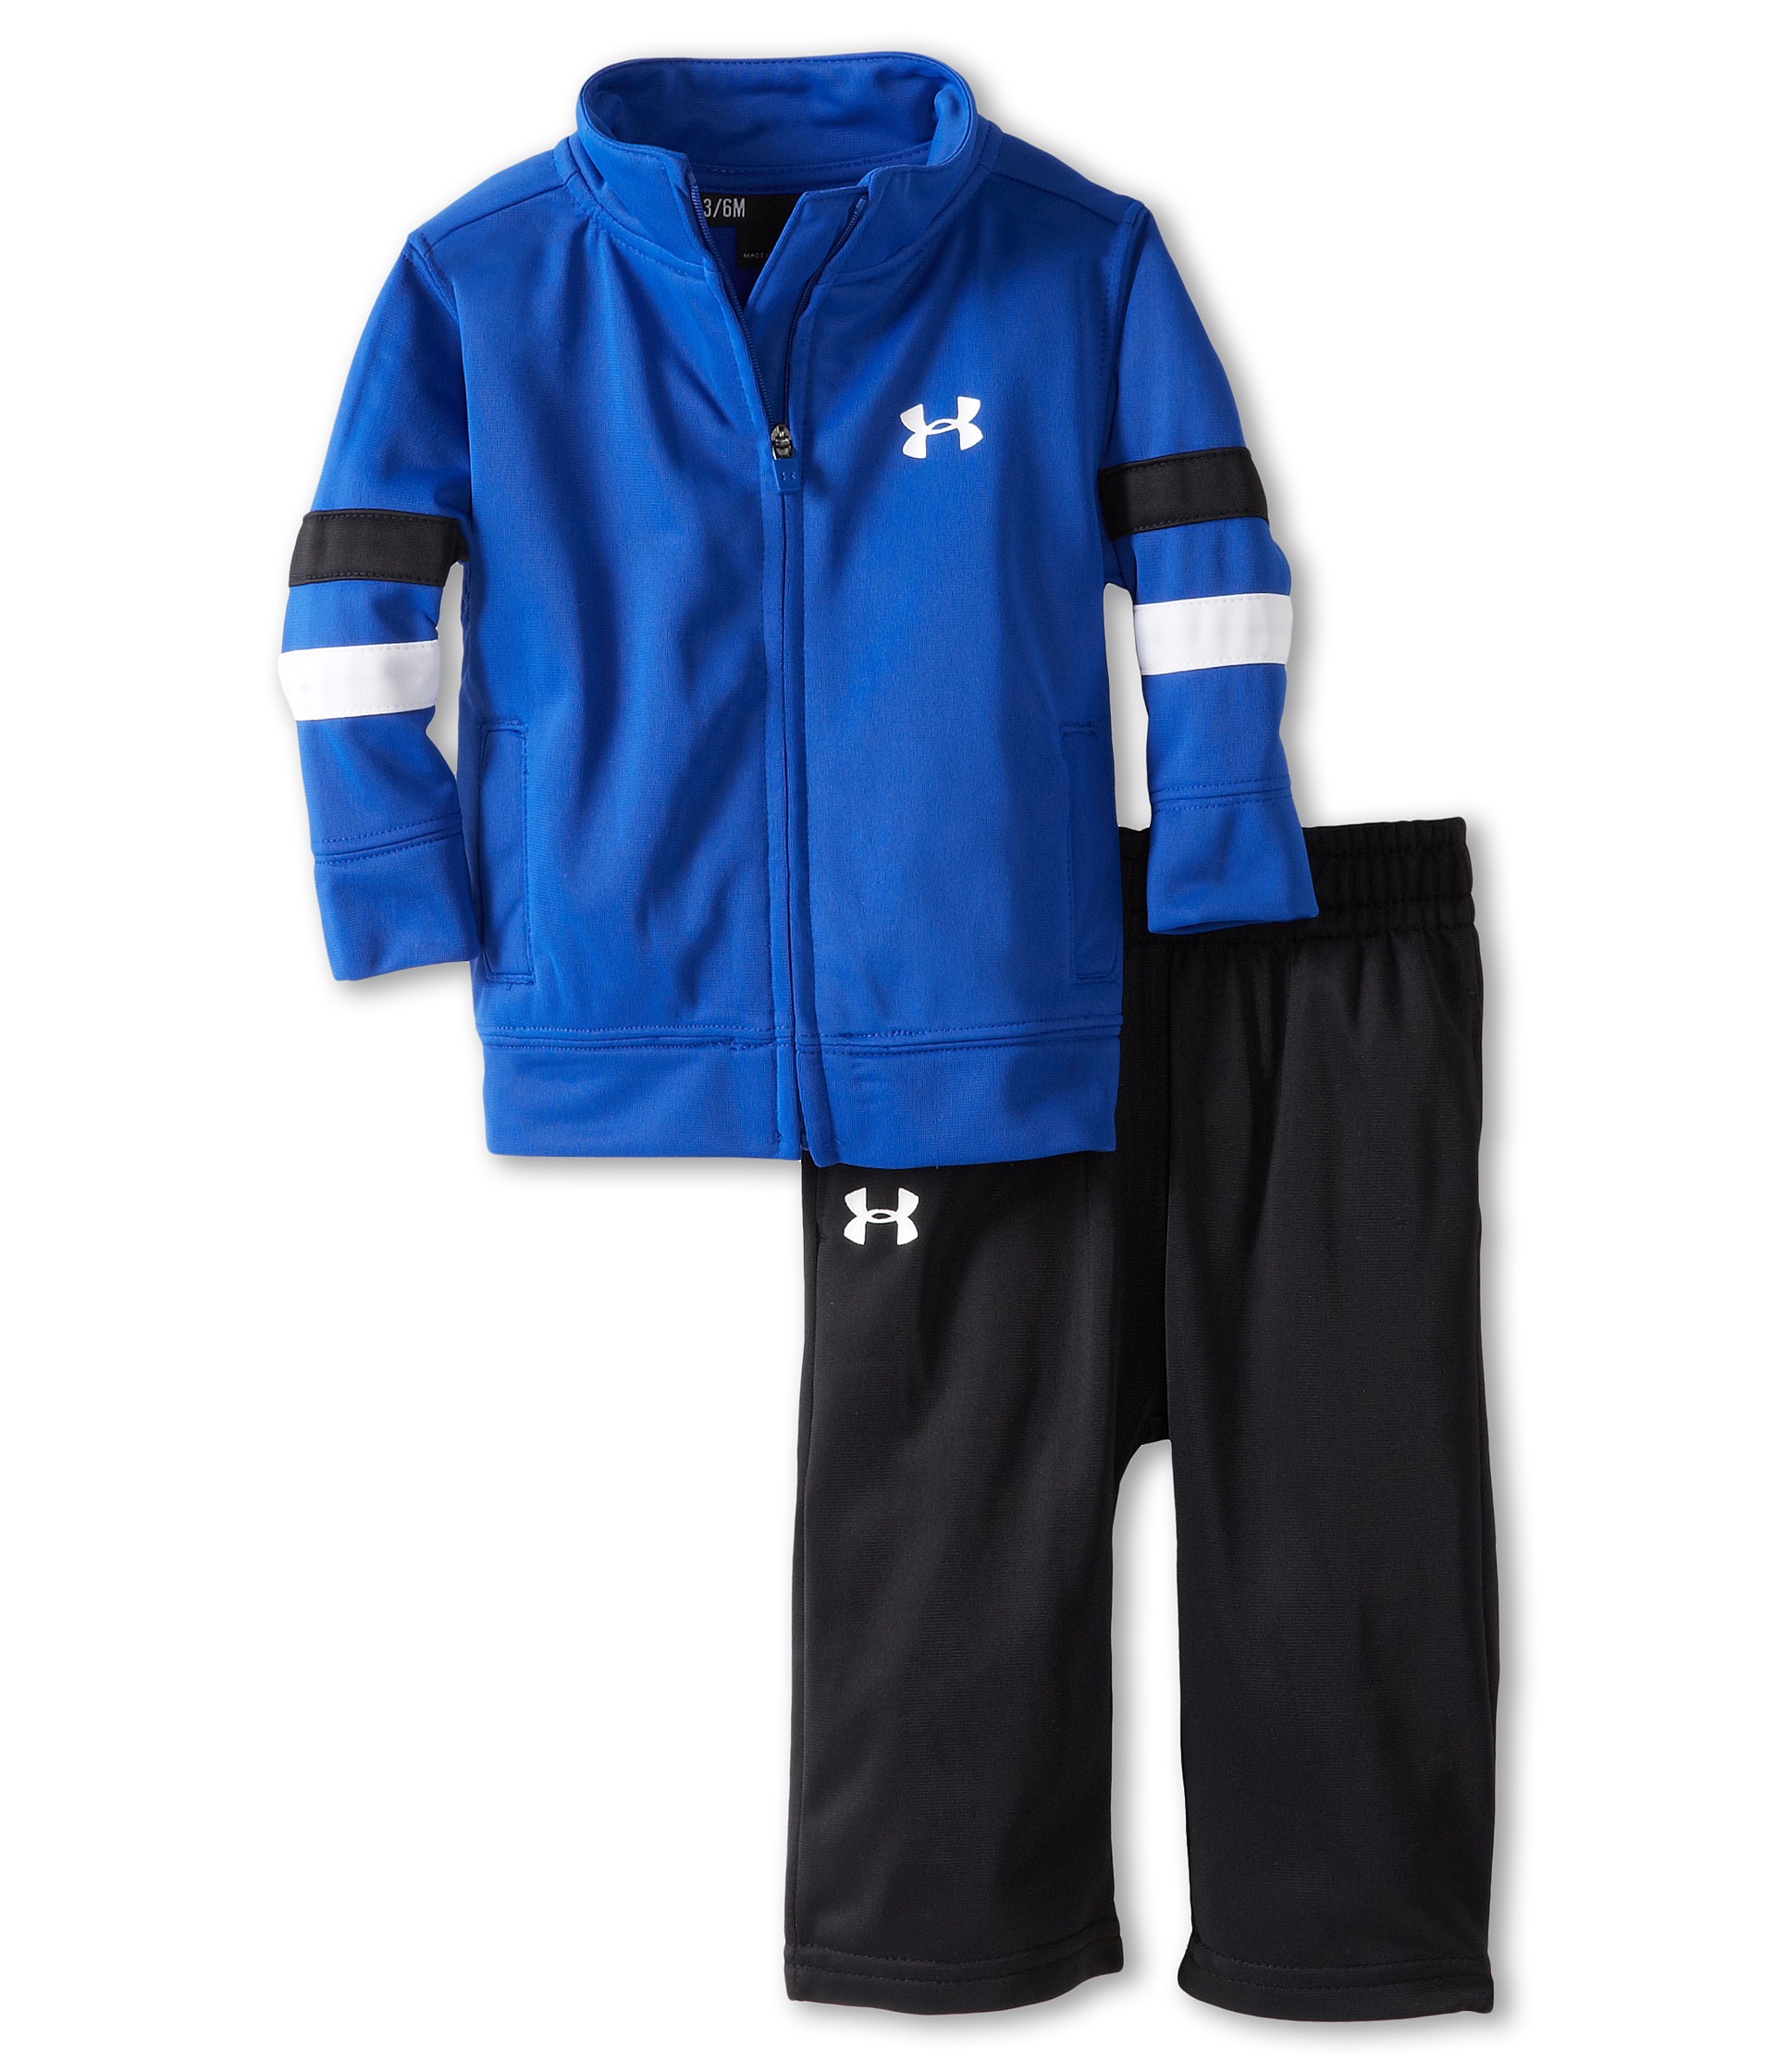 Under Armour Kids Warm Up Set Infant Royal | Shipped Free at Zappos